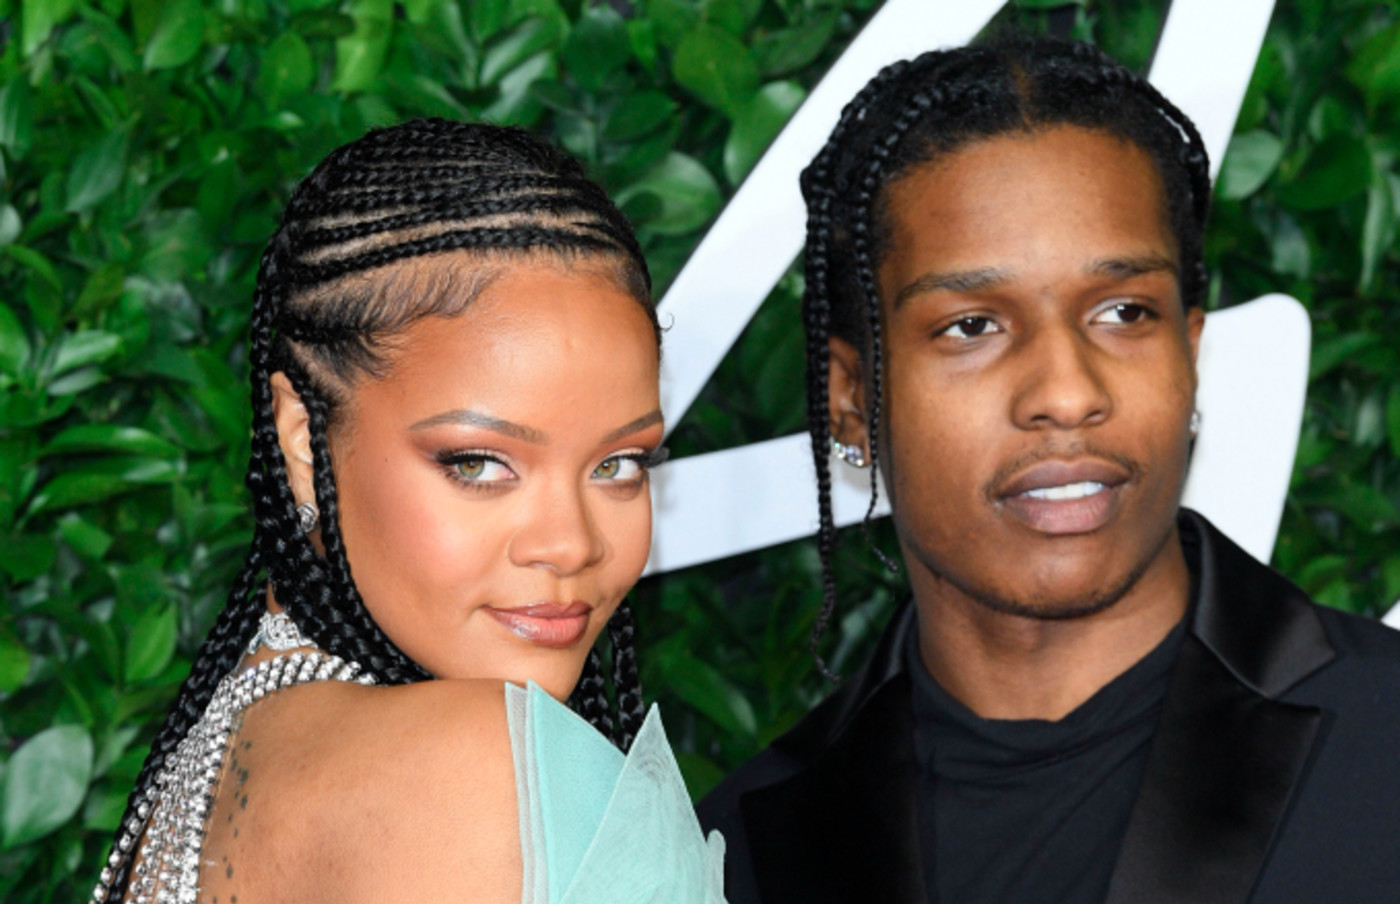 Asap who dated has rocky Rihanna and